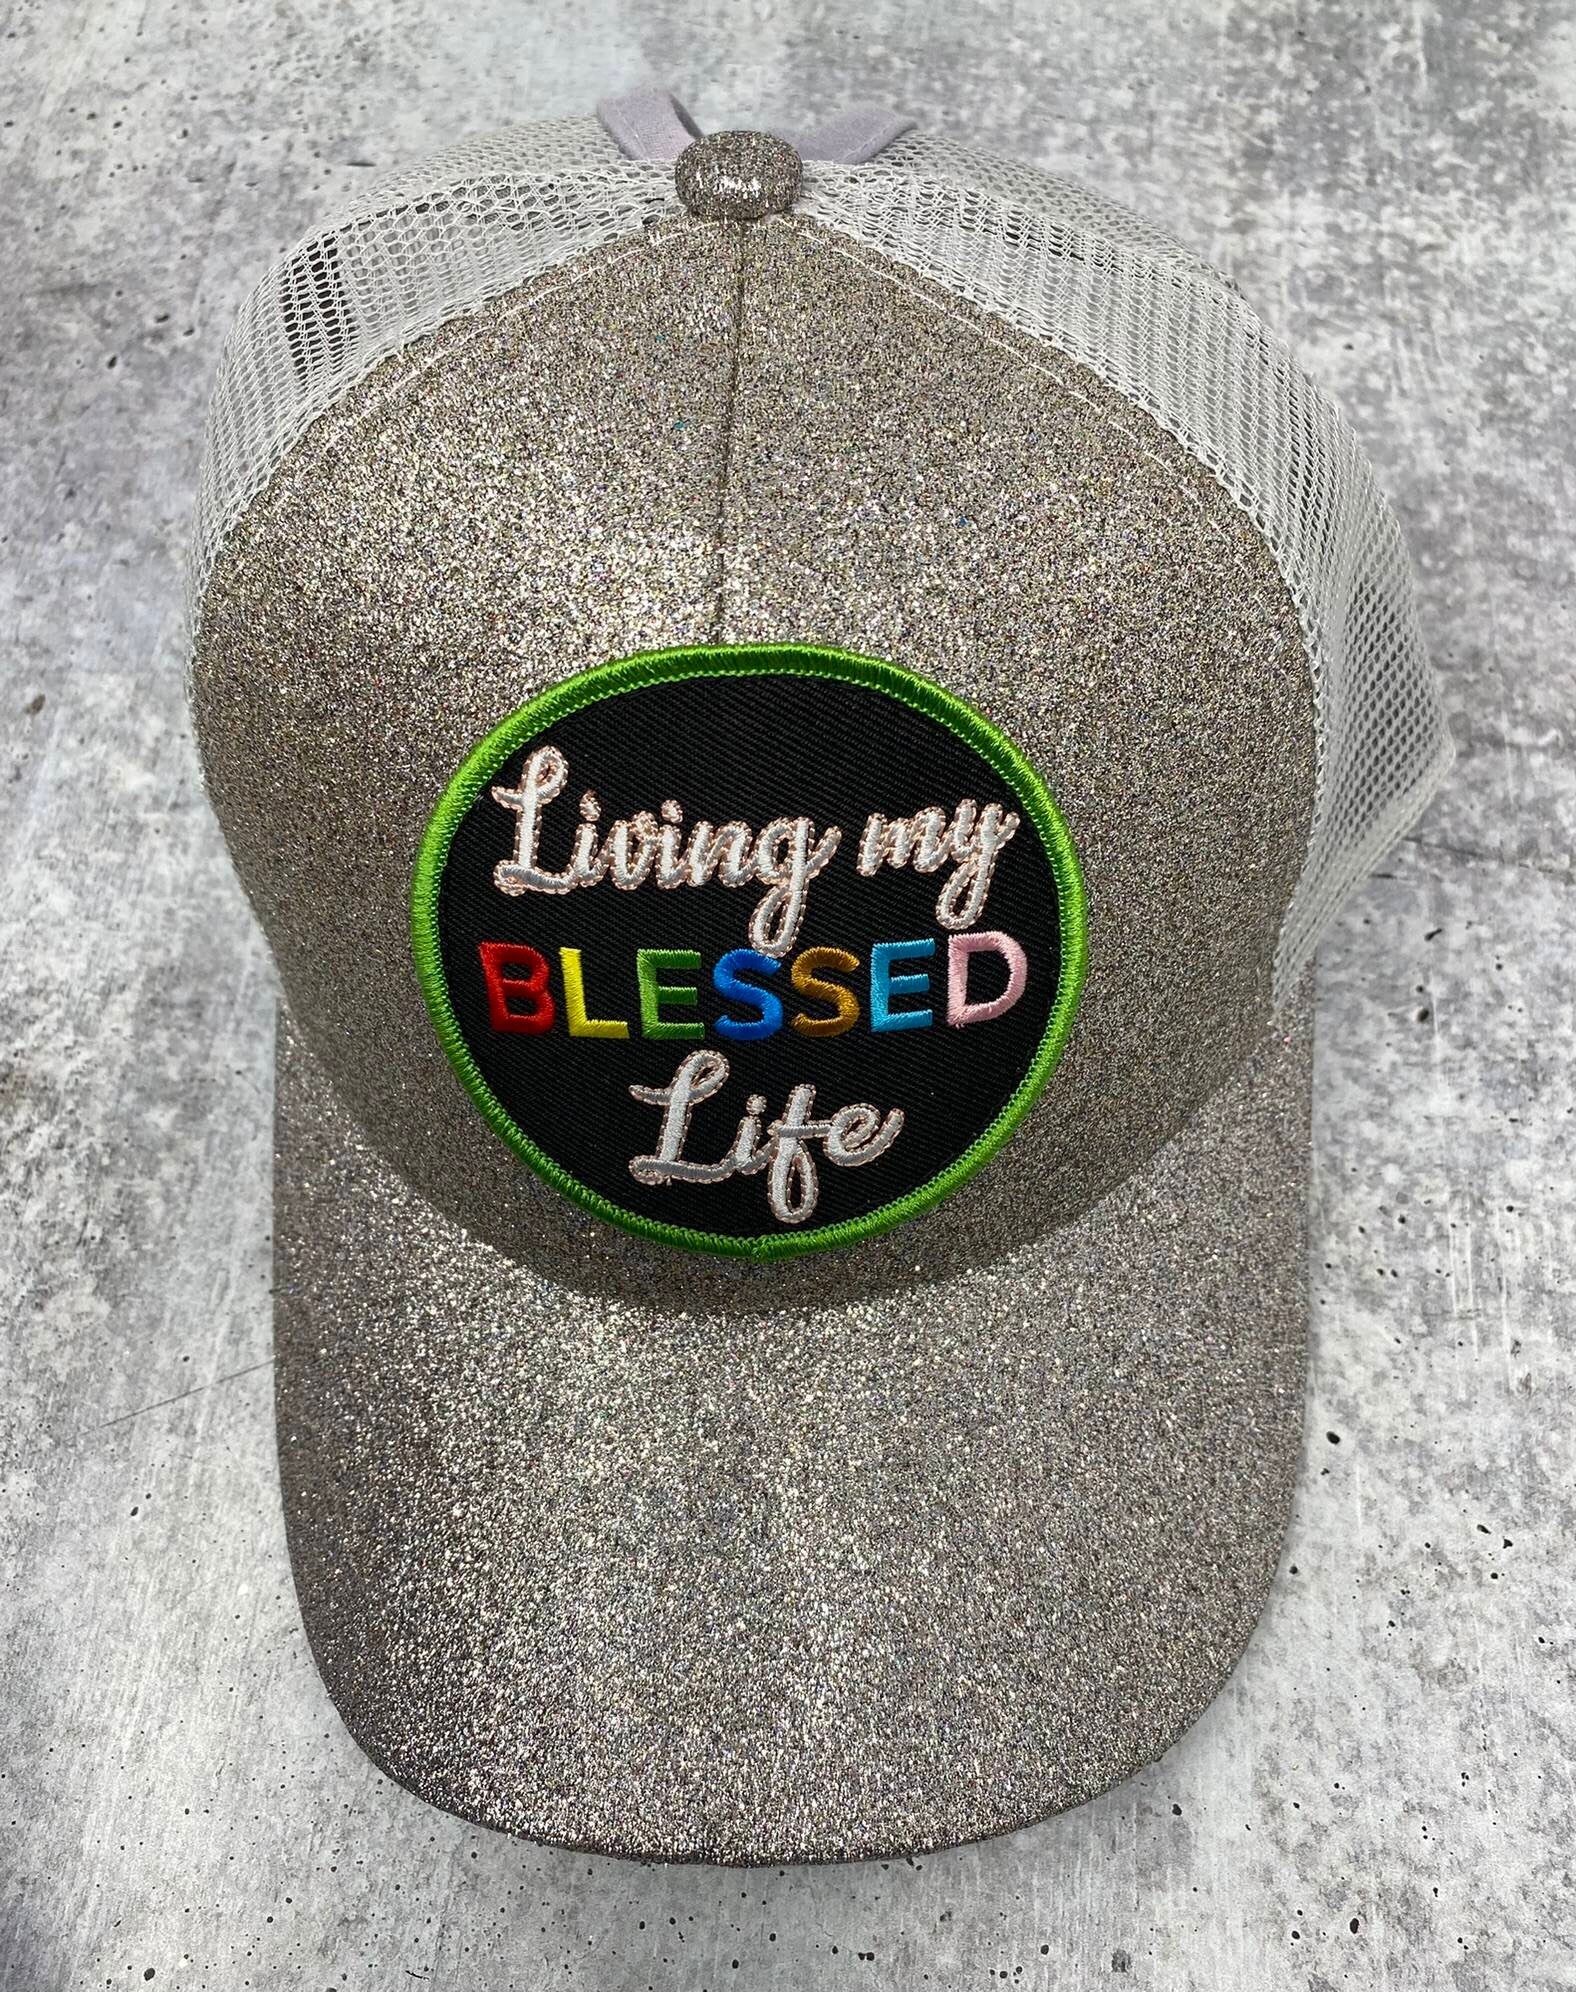 Cute Glitter Ponytail Hat, w/"Living My Blessed Life" Color Patch, Sparkling Bad Hair Day Hat, Cute Hat for Sunblocking, & Summer Hairstyle